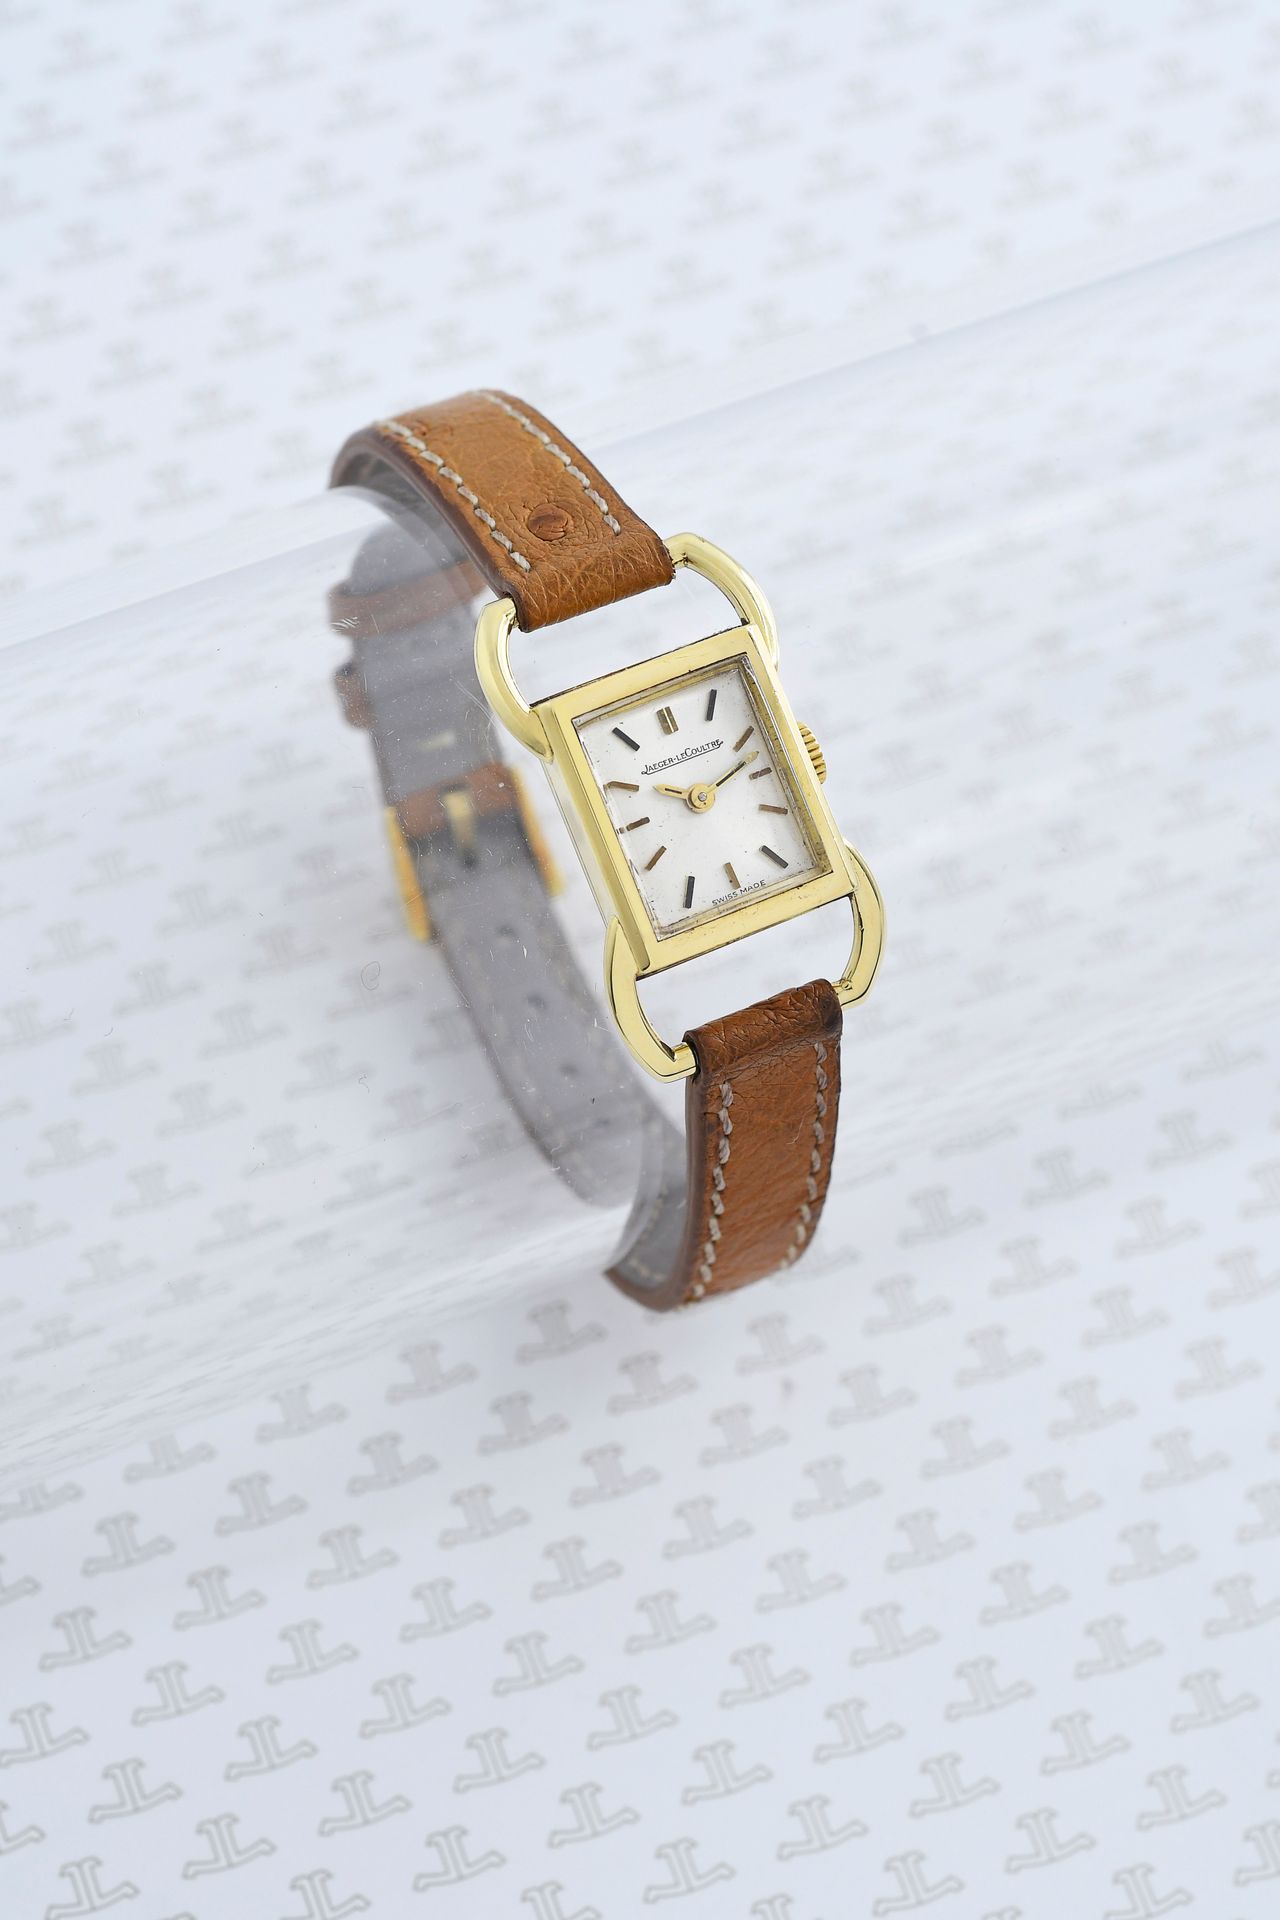 Null JAEGER-LECOULTRE (BABY ÉTRIER / LADY - OR JAUNE N° 1101011A), vers 1950

Mo&hellip;